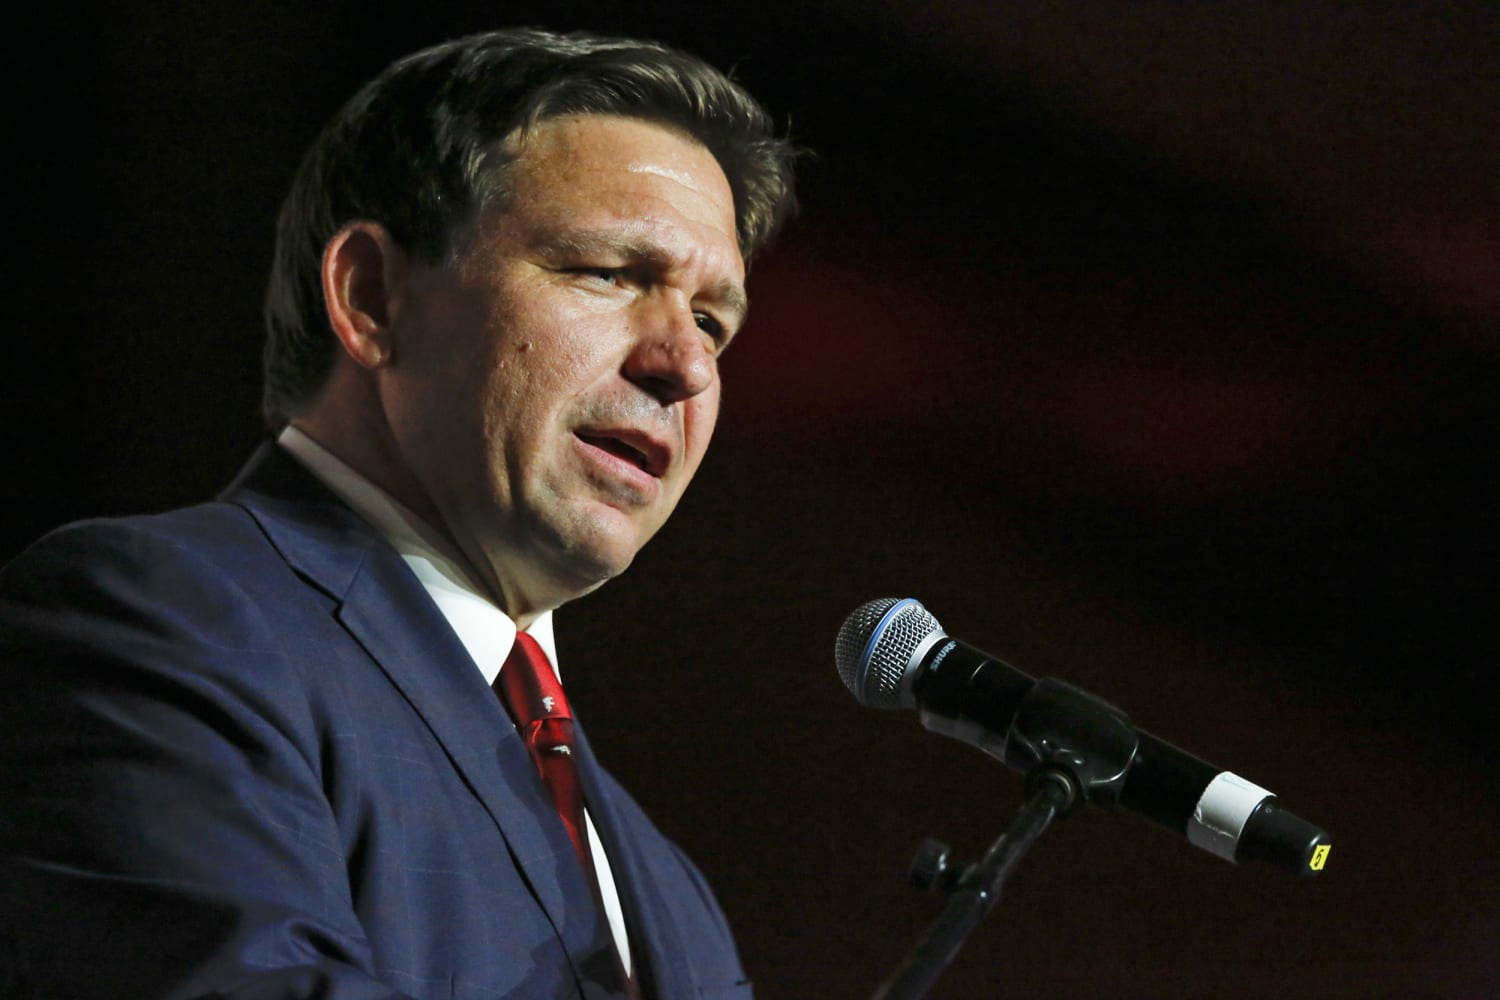 DeSantis sued by Florida prosecutor he removed over abortion